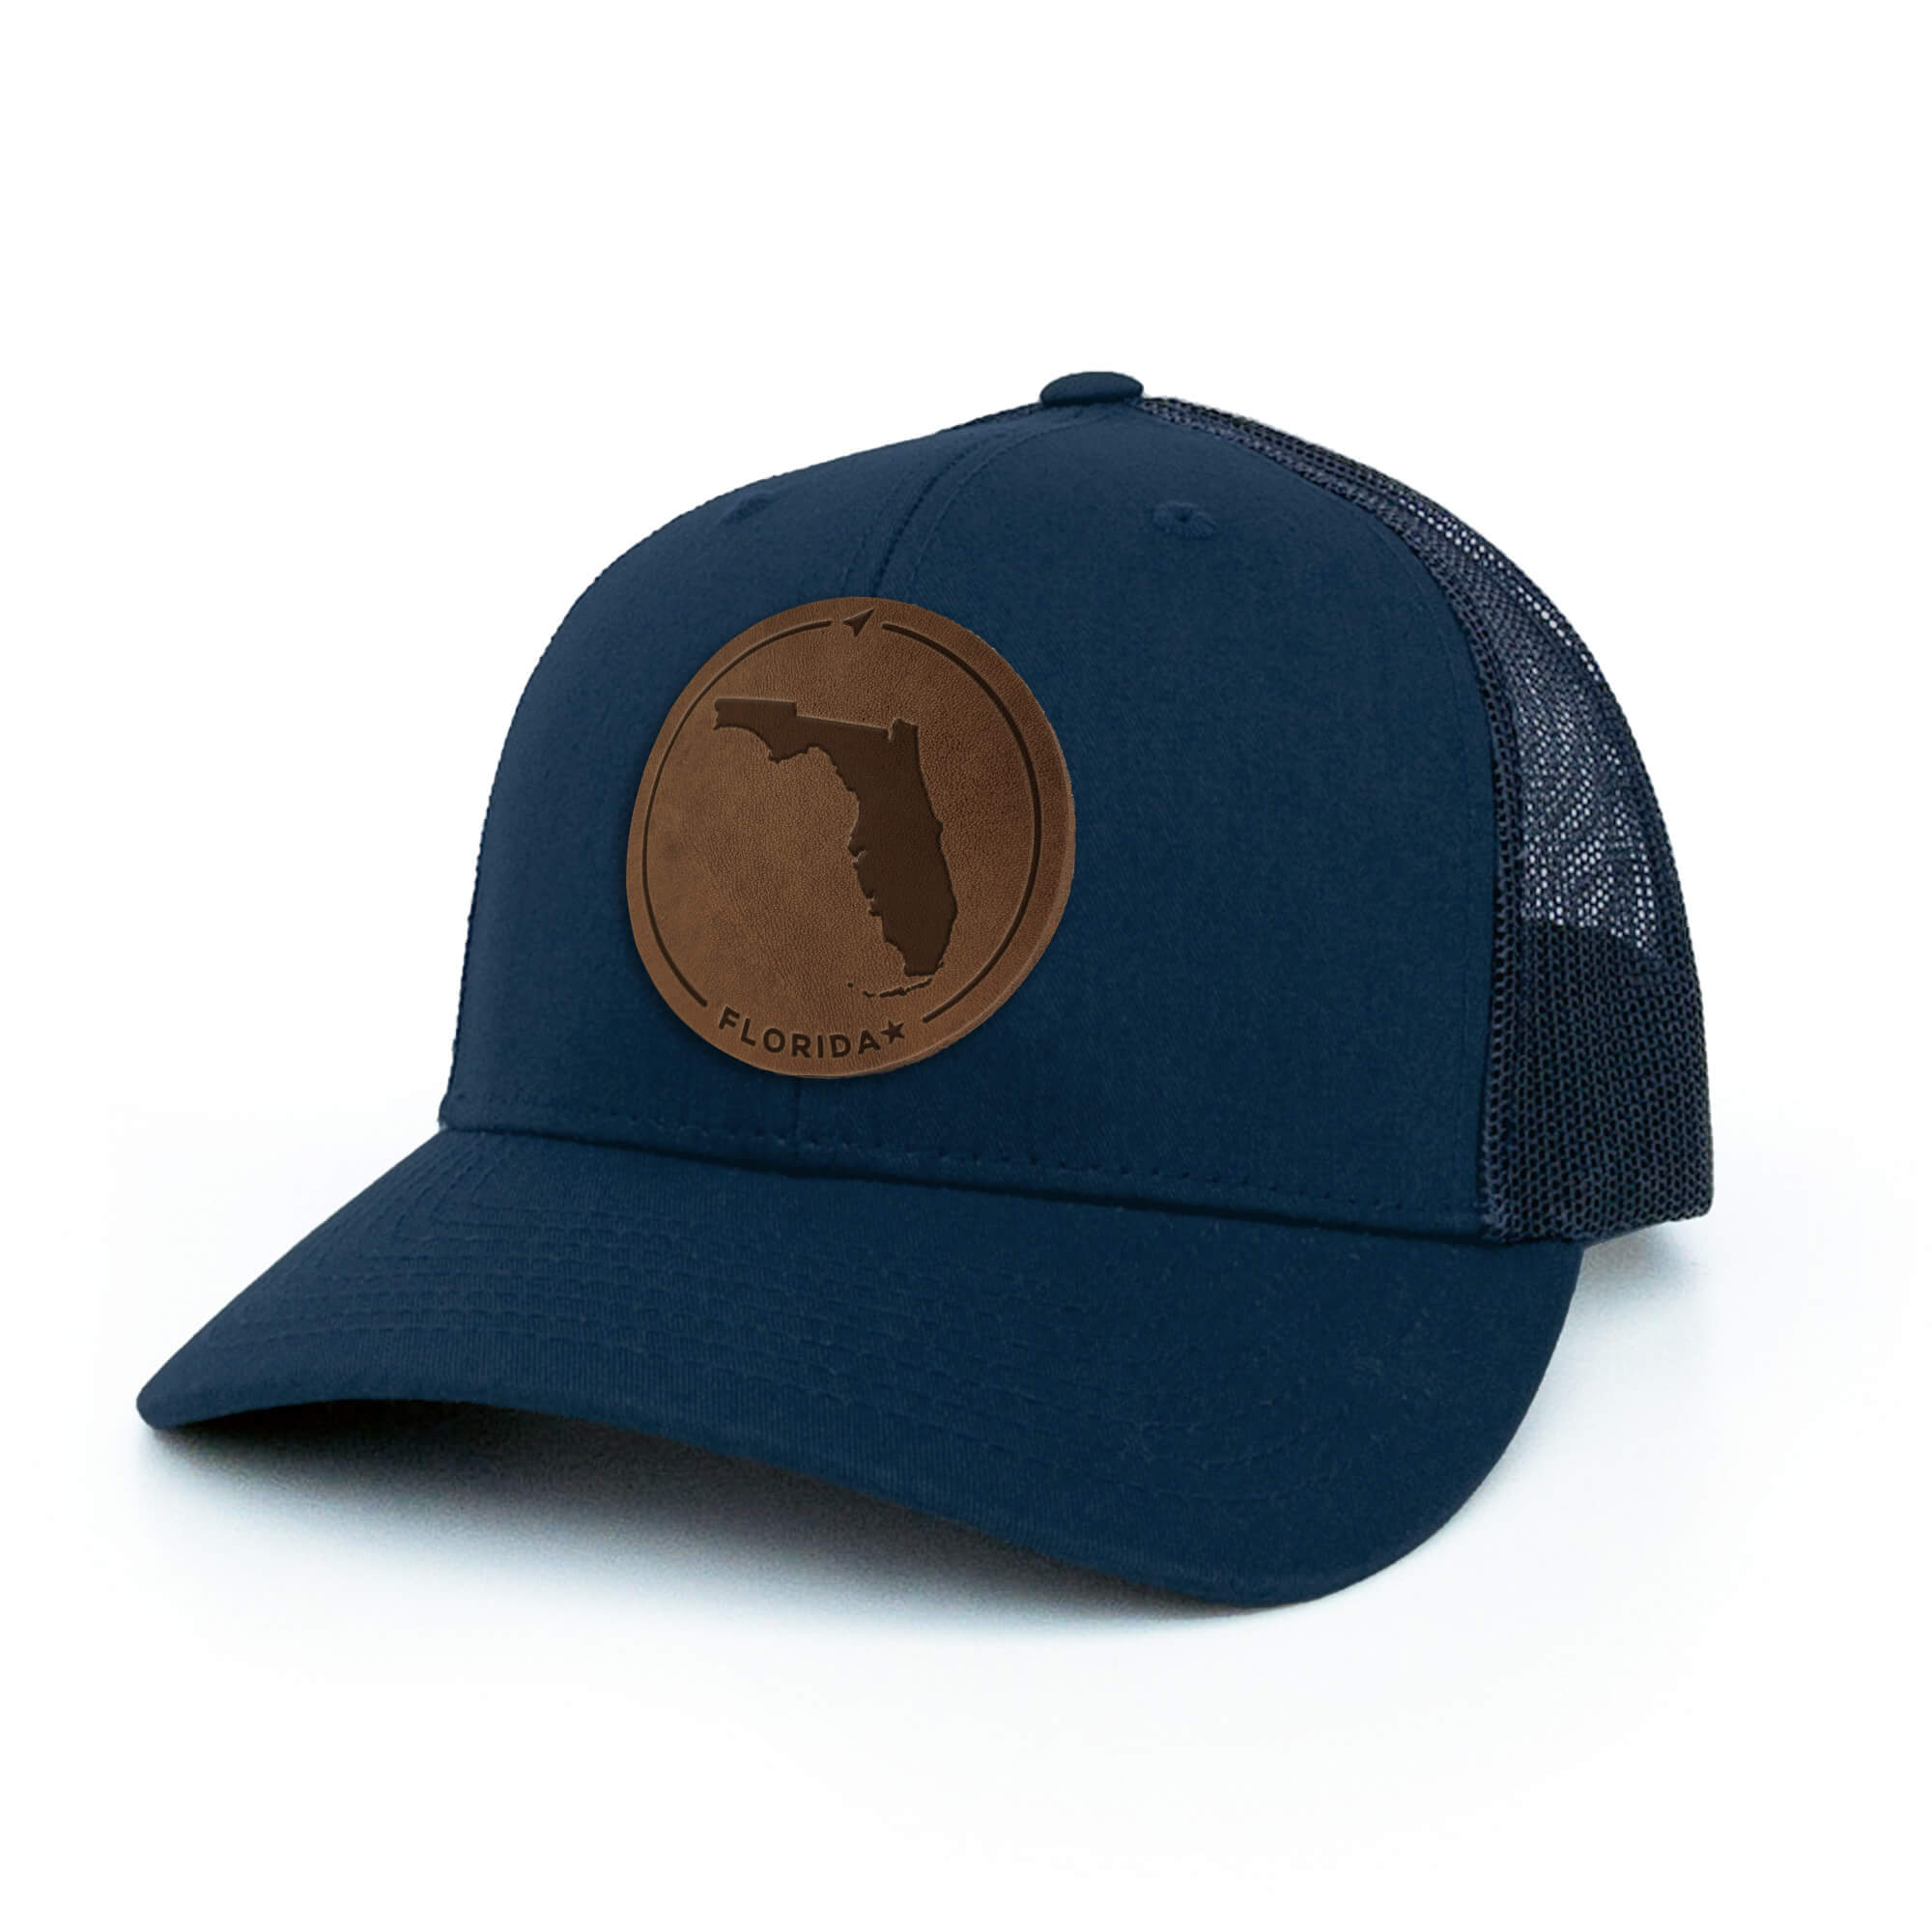 Navy trucker hat with full-grain leather patch of Florida | BLACK-003-010, CHARC-003-010, NAVY-003-010, HGREY-003-010, MOSS-003-010, BROWN-003-010